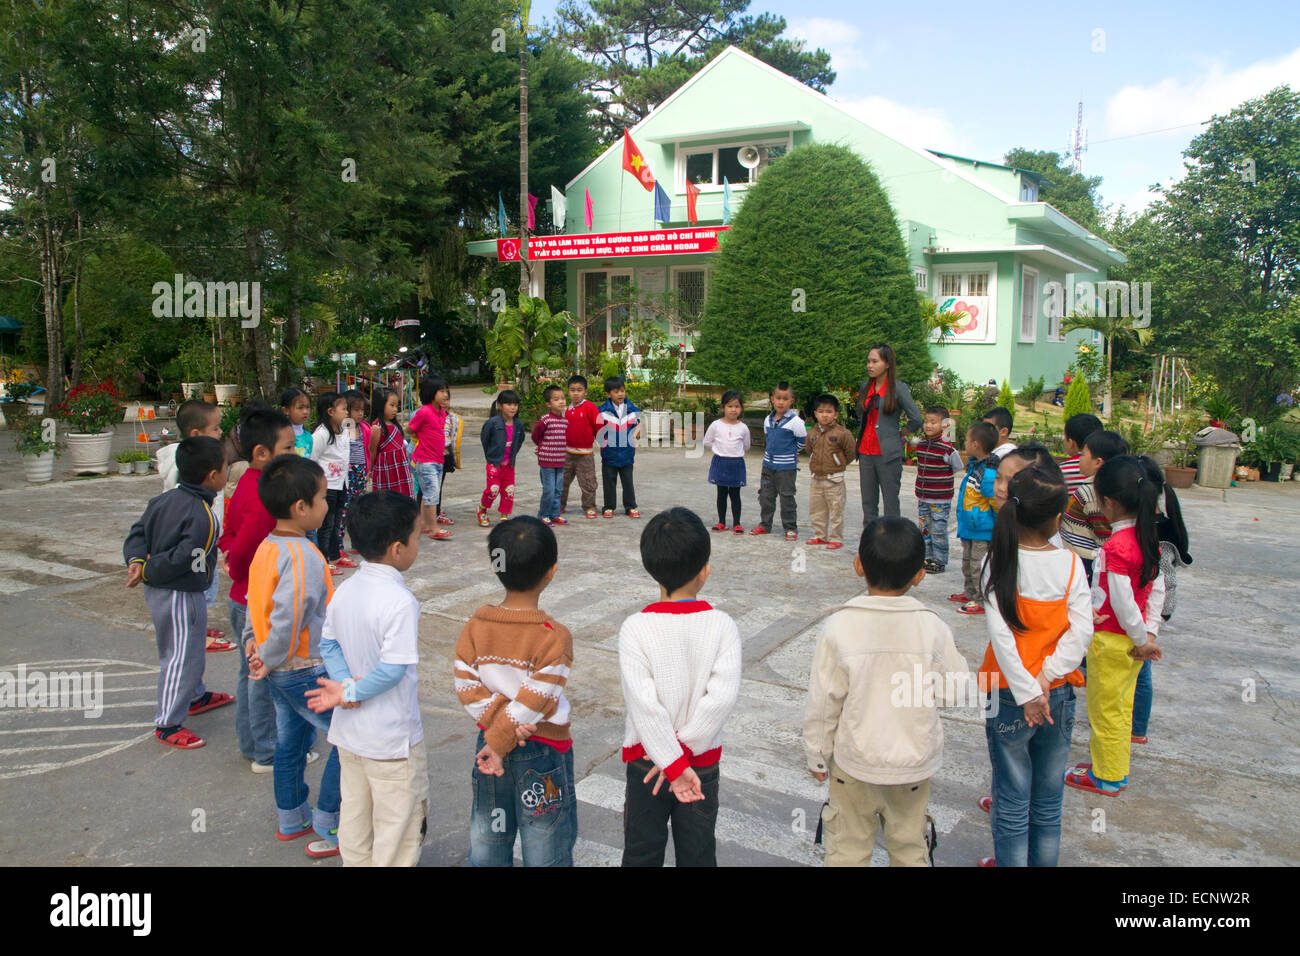 Young students outdoors at an elementary school in Da Lat, Vietnam. Stock Photo